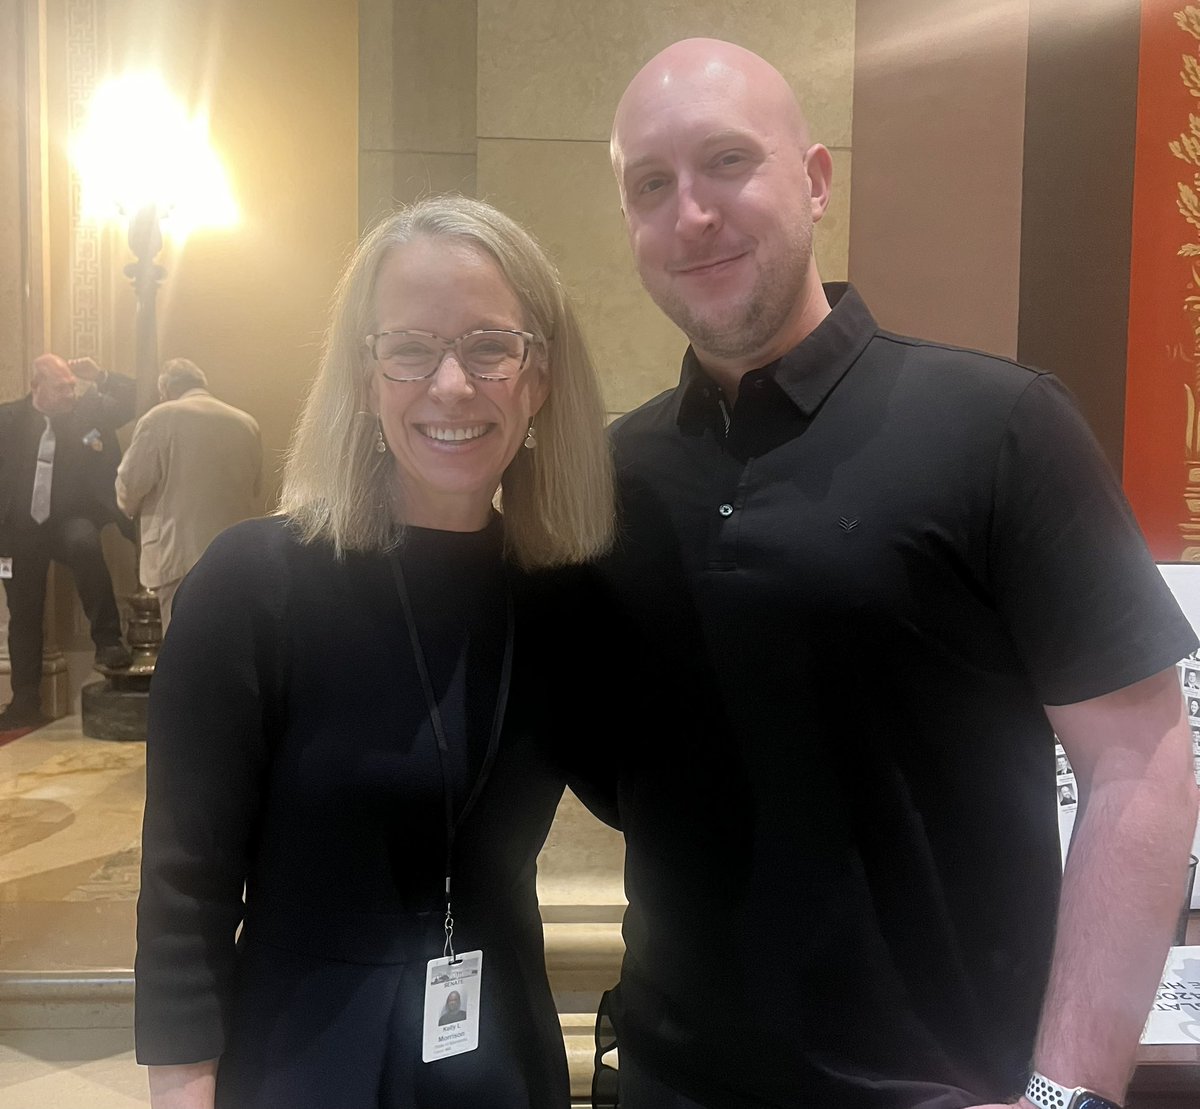 Great to see constituent Griffin Dooling, CEO of @BlueHorizonEnergy and board president of @Mn_SEIA at the Capitol to advocate for clean energy policy and expansion! #SD45